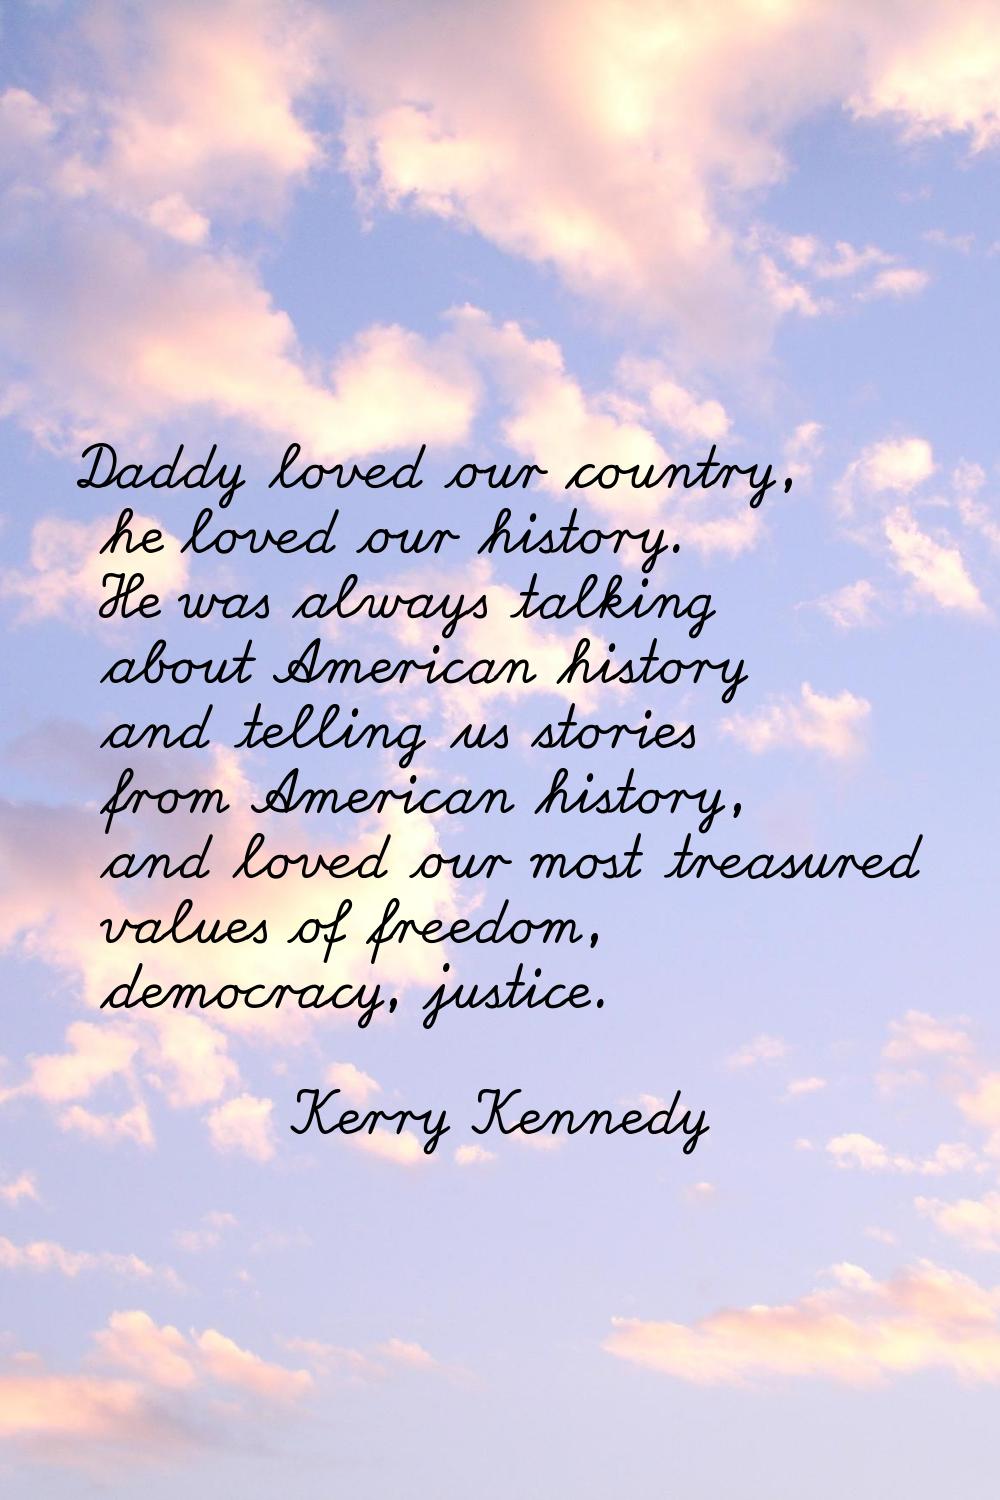 Daddy loved our country, he loved our history. He was always talking about American history and tel